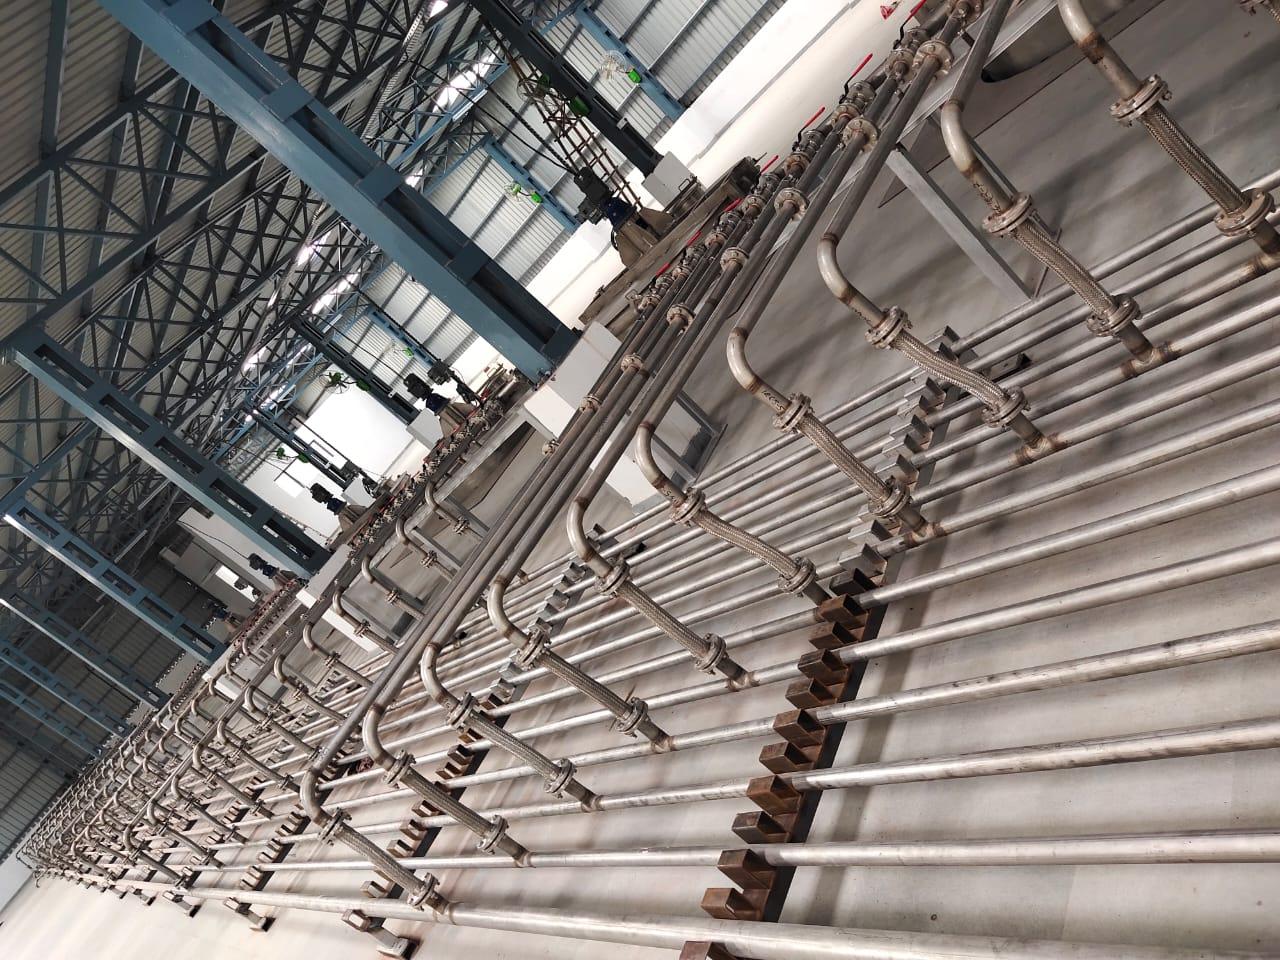 STAINLESS STEEL PIPELINE FOR CHEMICALS, GASES, FOOD PROCESSING LINES